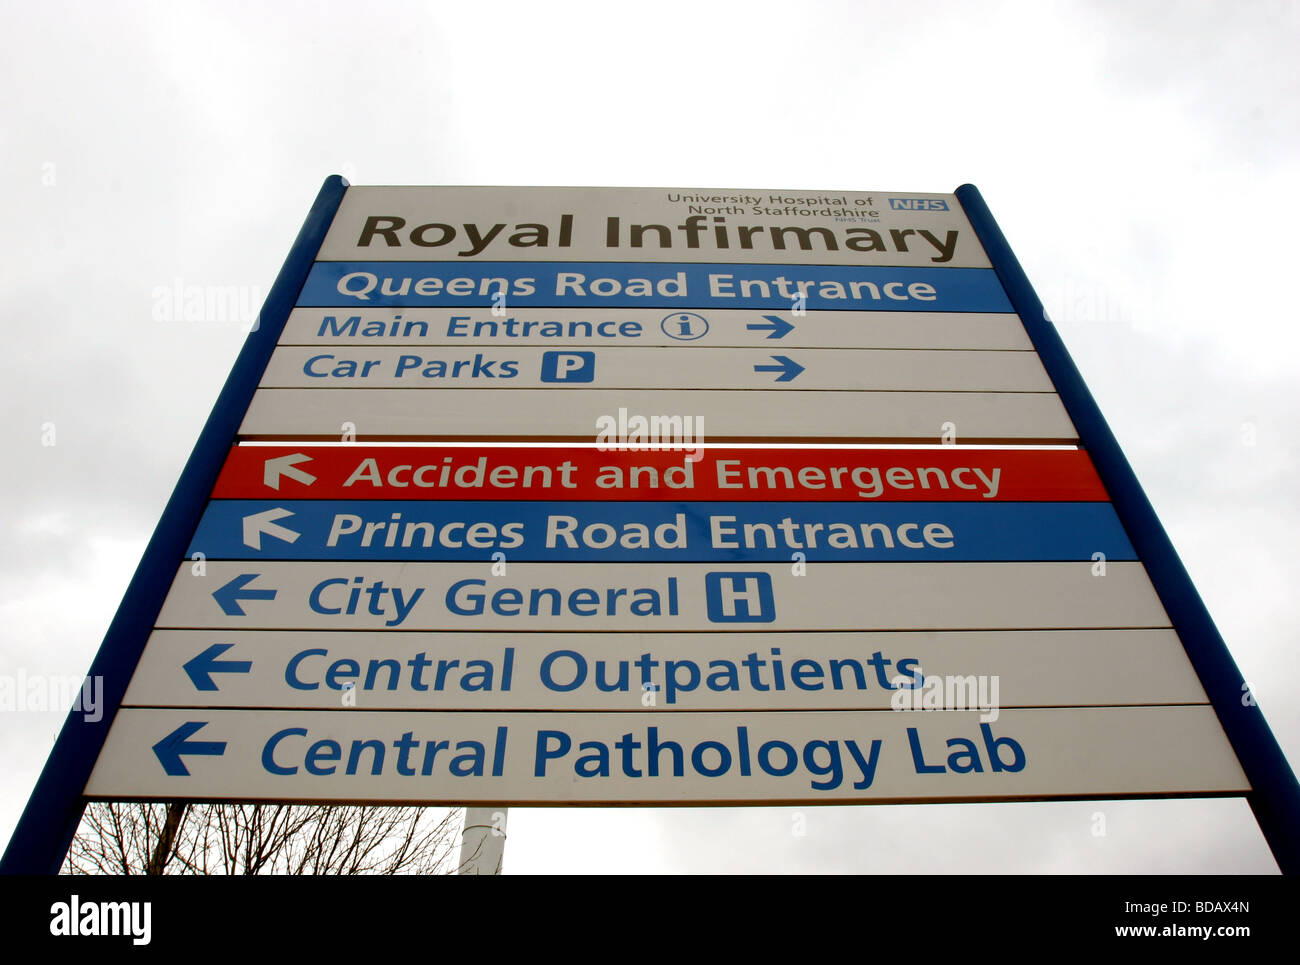 North Staffordshire Royal Infirmary Stoke on Trent Staffordshire signage Stock Photo